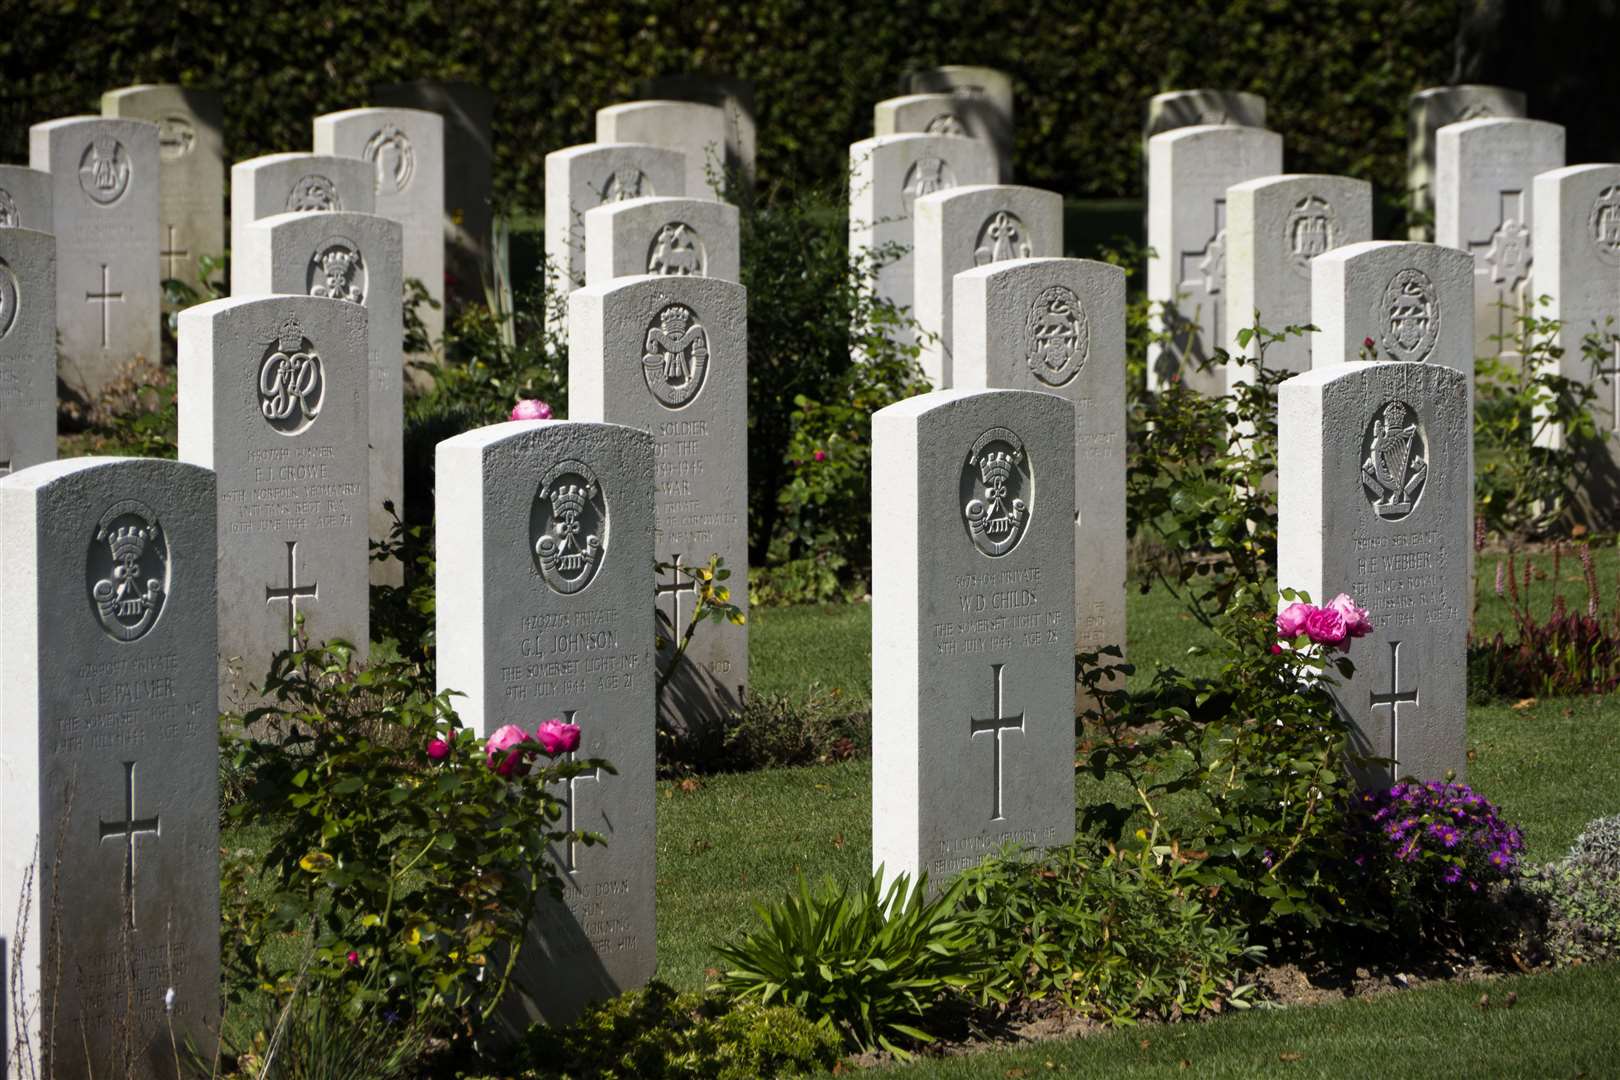 The Bayeux War Cemetery is the largest Commonwealth cemetery of World War II in France and contains more than 4000 burials, hundreds of which are unidentified soldiers.